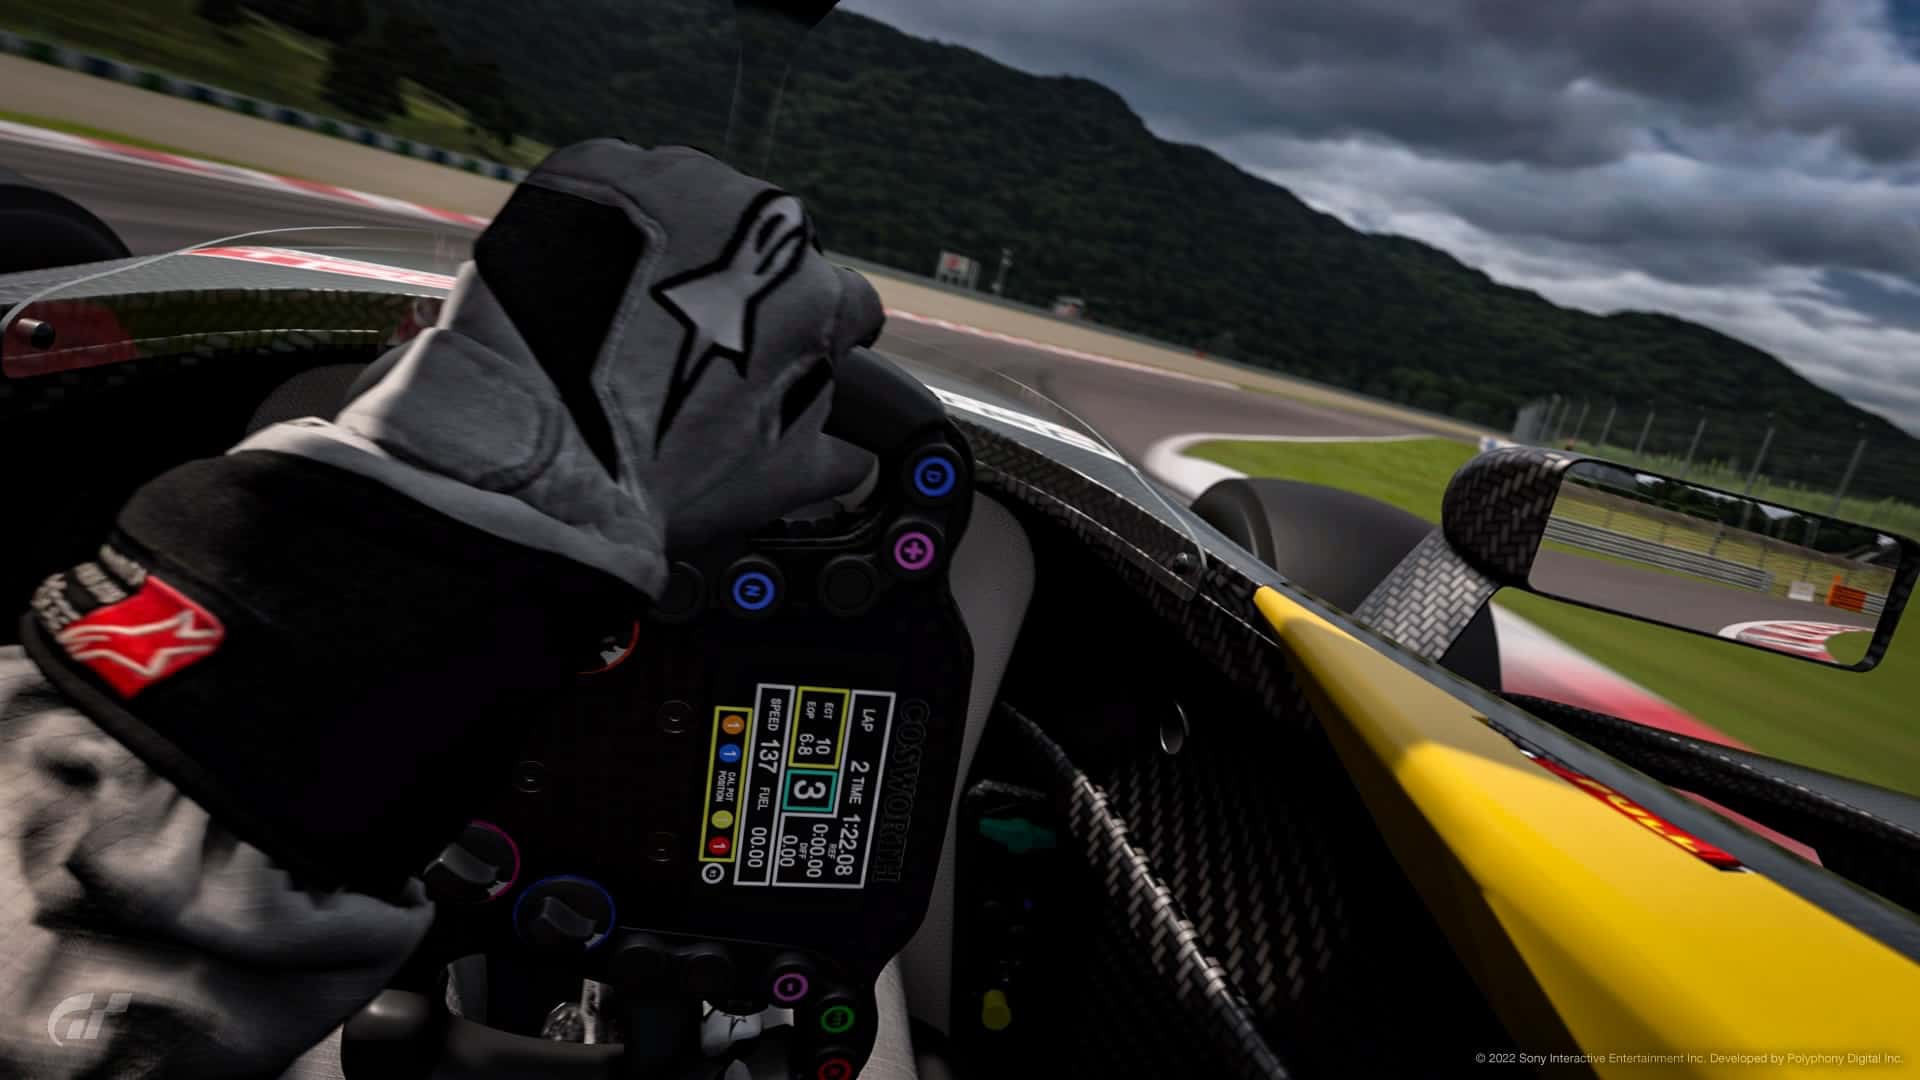 Your guide to Gran Turismo 7's Daily Races, w/c 23rd May: Super Formulaic